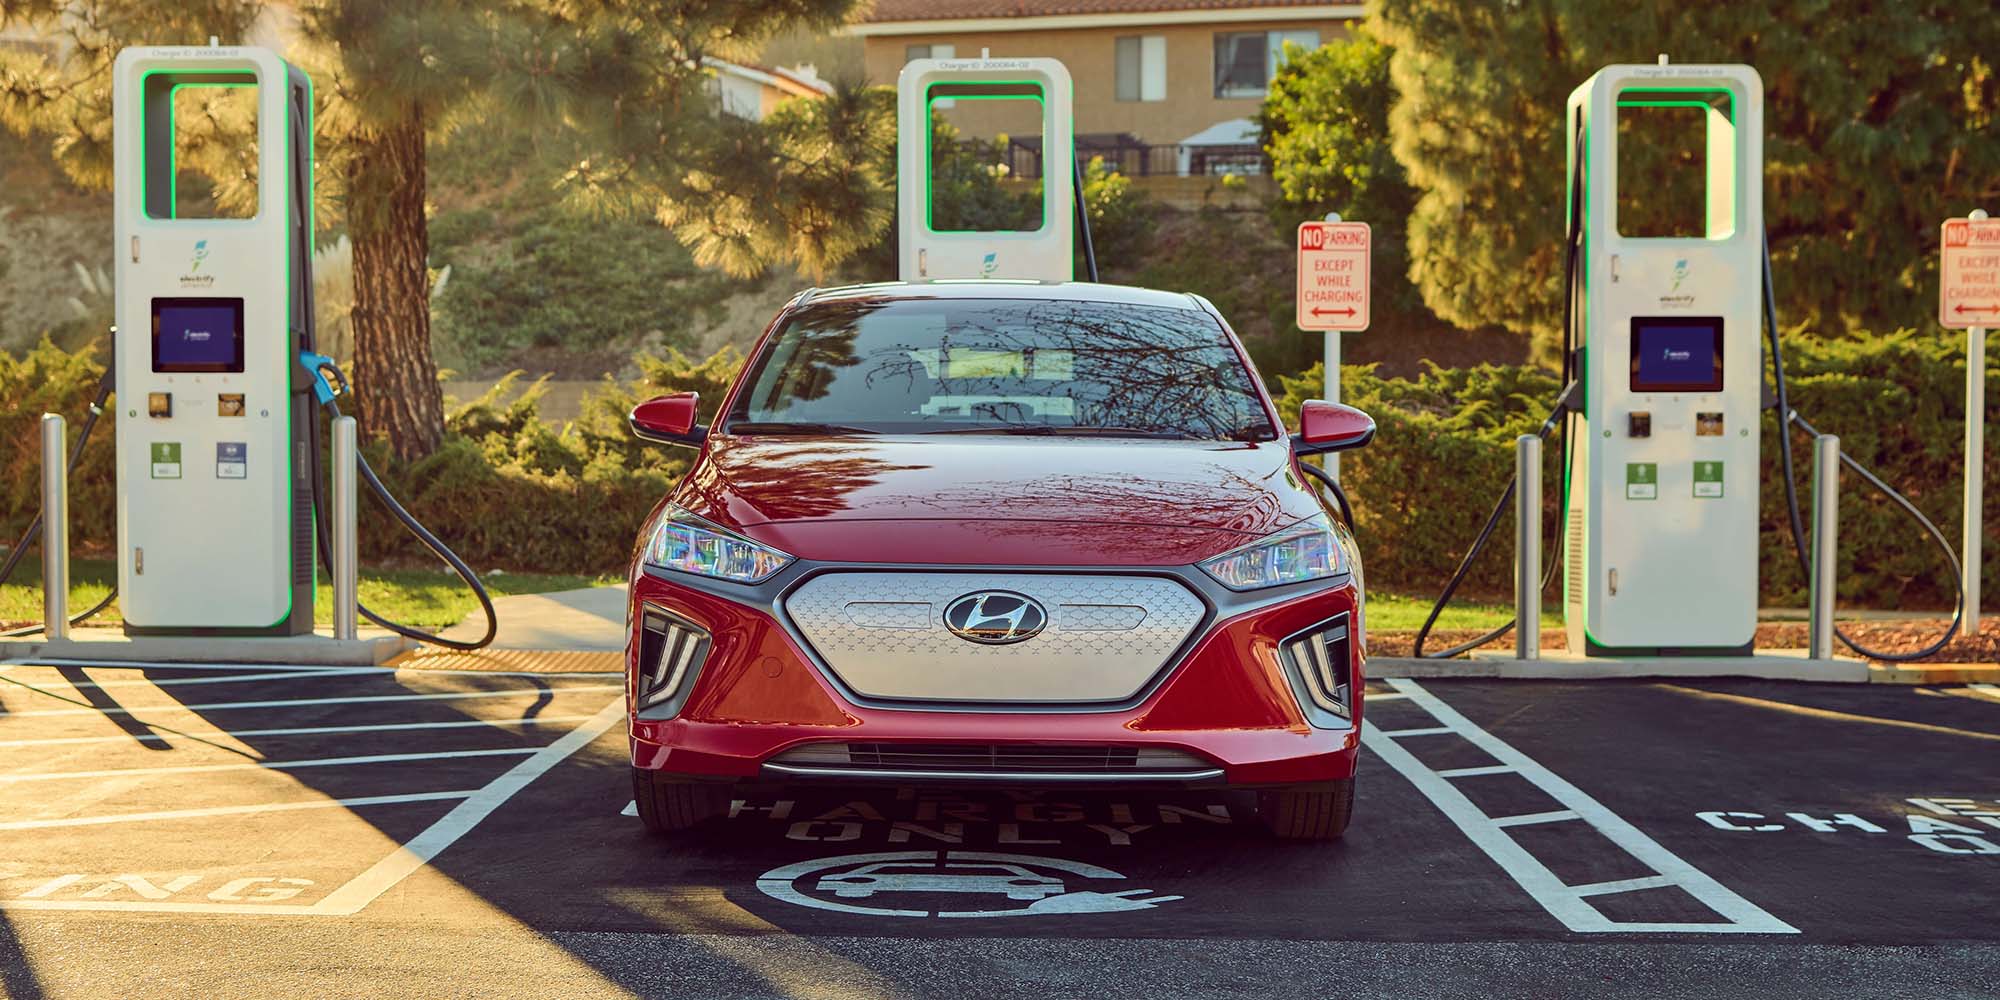 53 US utilities will build a nationwide fast-charging EV network by end of  2023